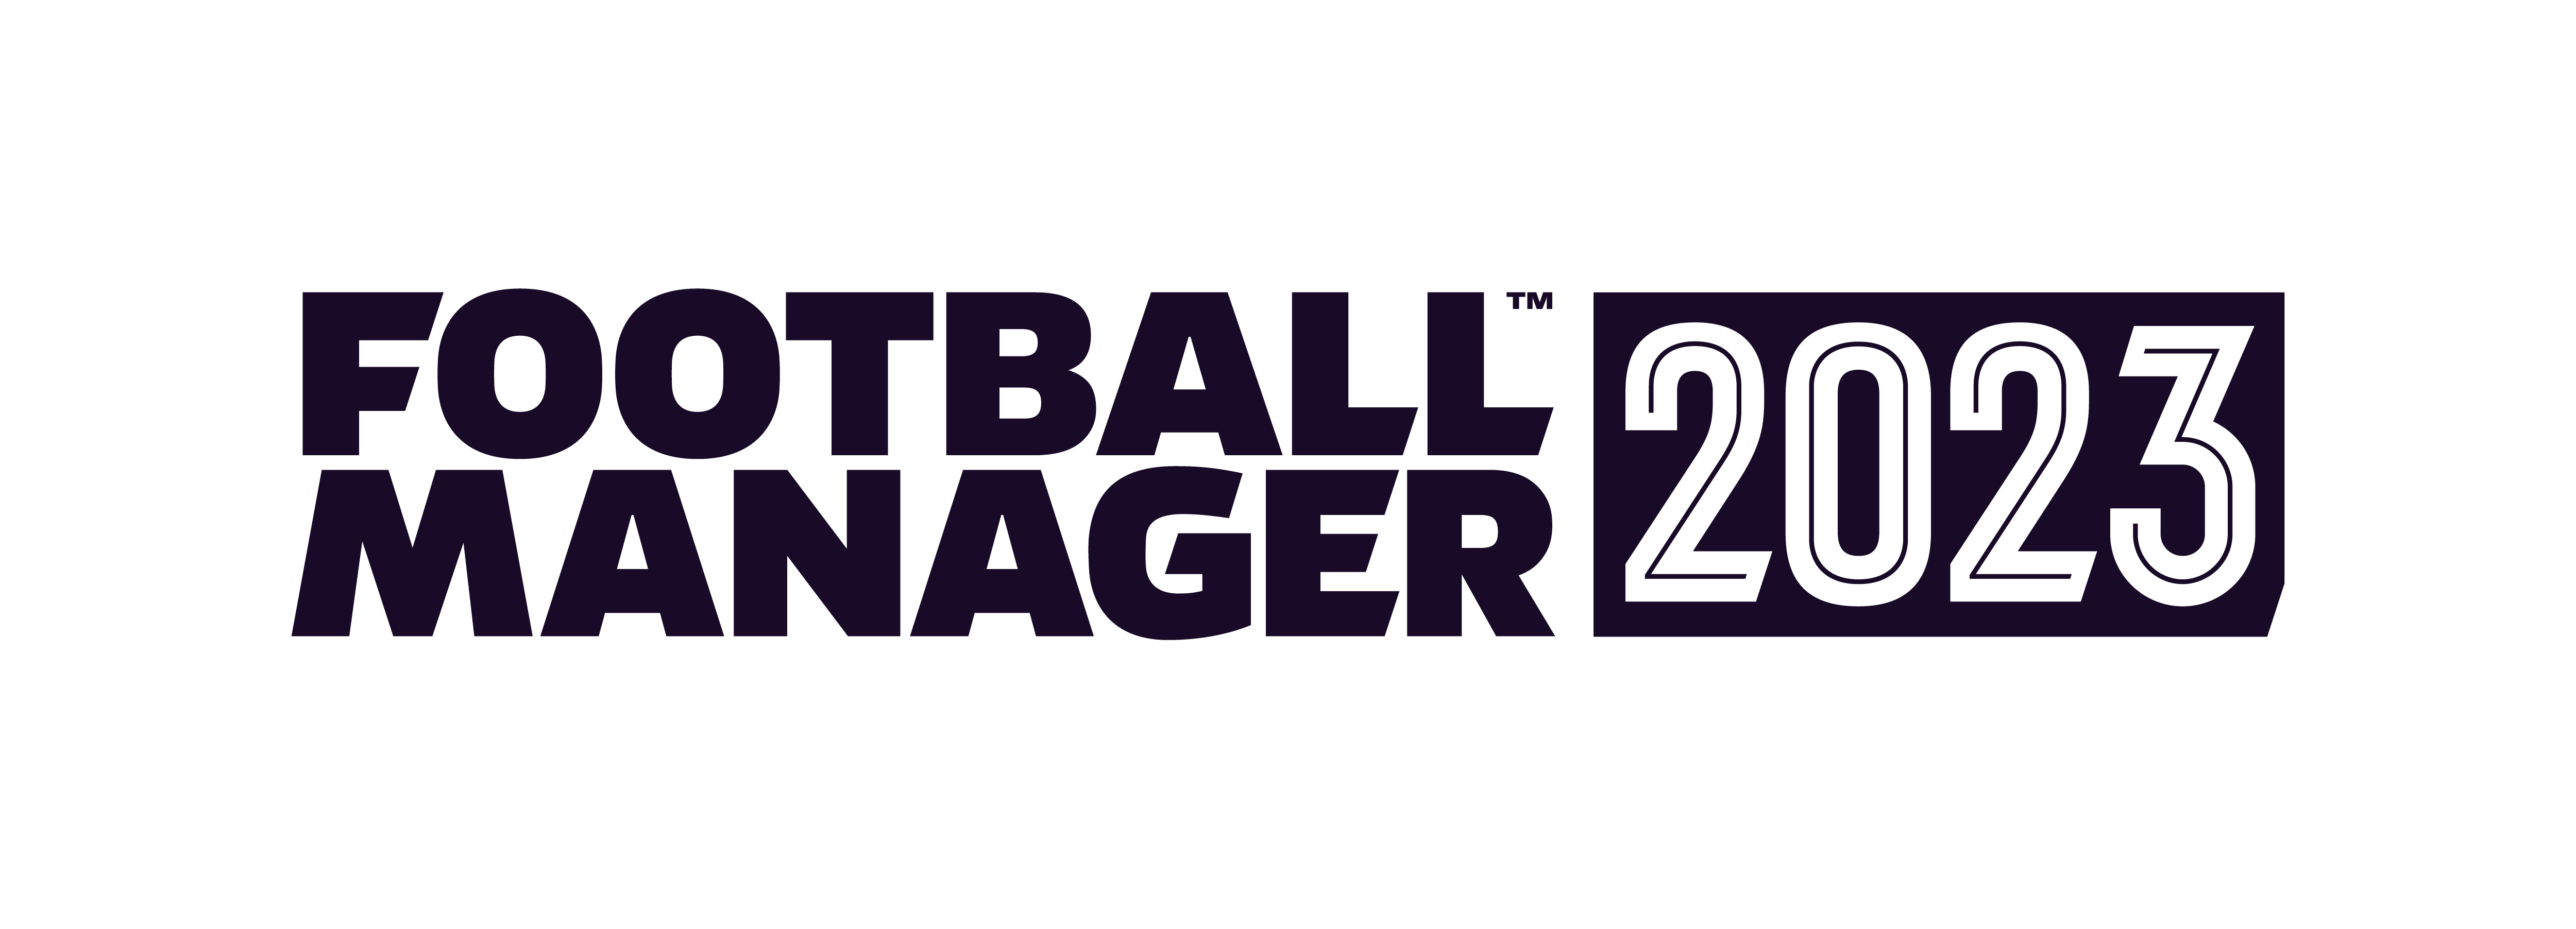 Football Manager 2022 OUT NOW